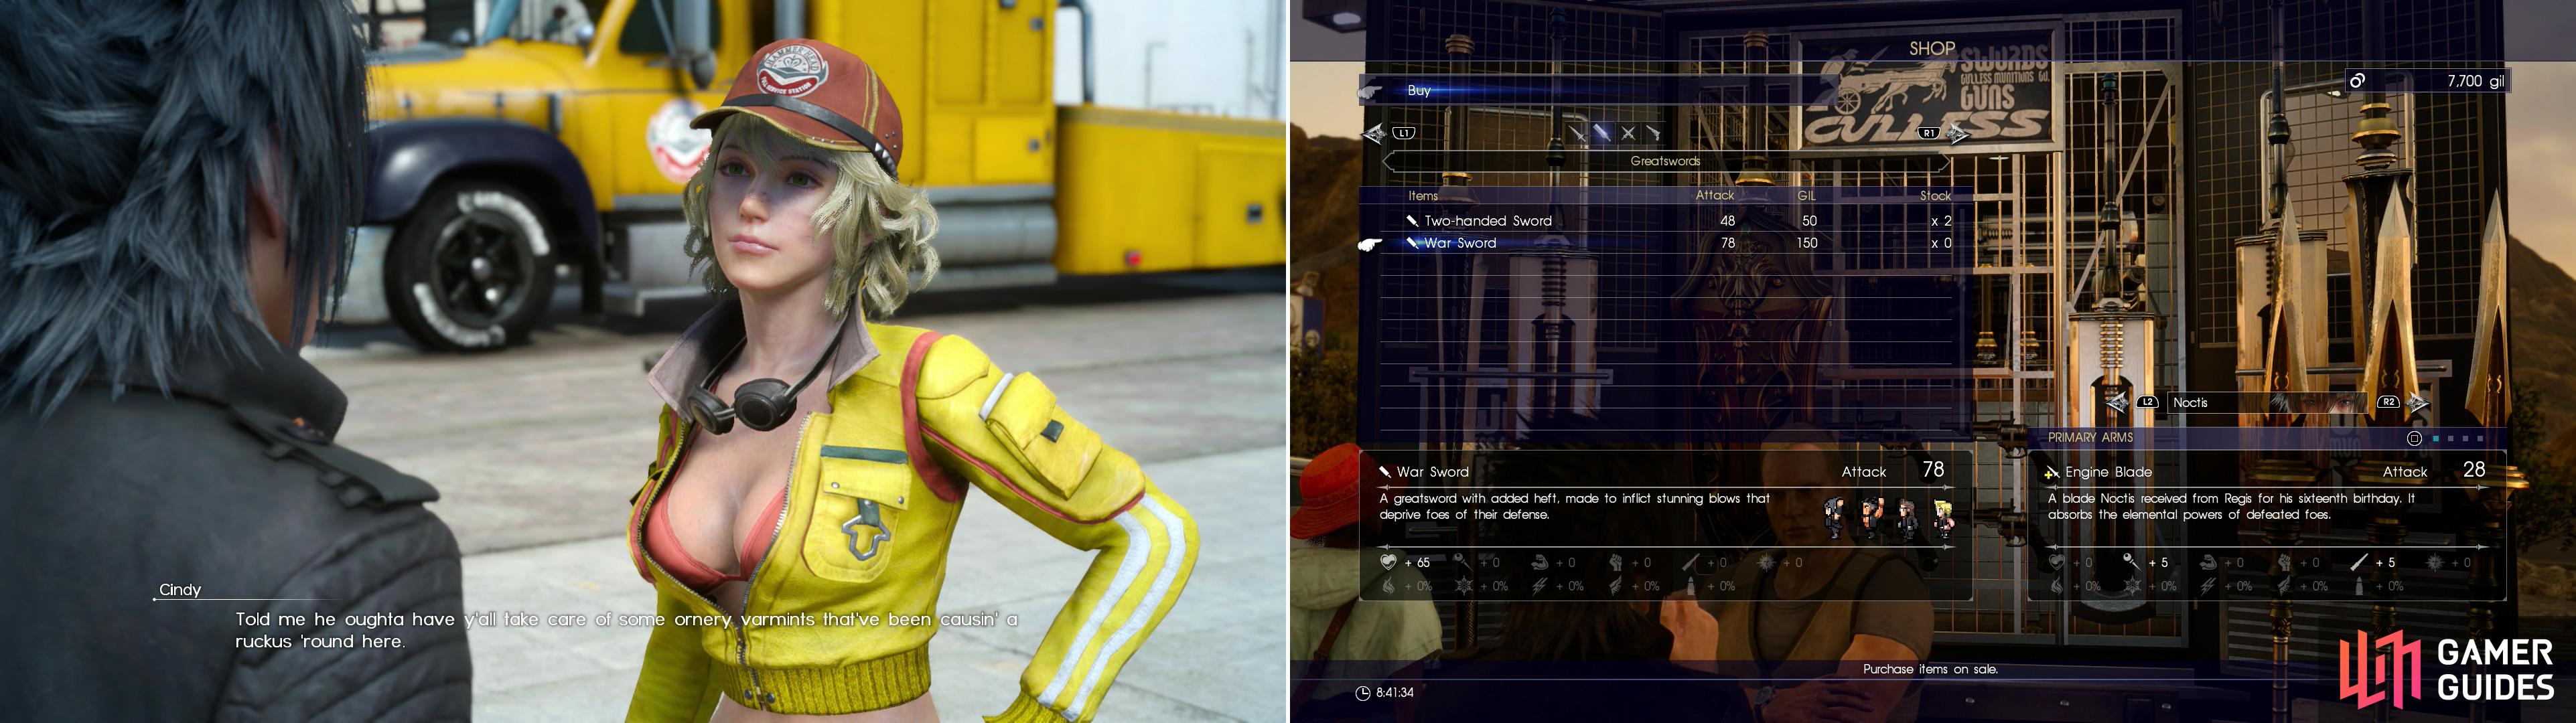 Cindy will give you some starting cash, and a bit of work to do while you wait (left). While you don't have much in the way of funds right now, buying a few weapon upgrades may be worth the Gil (right).